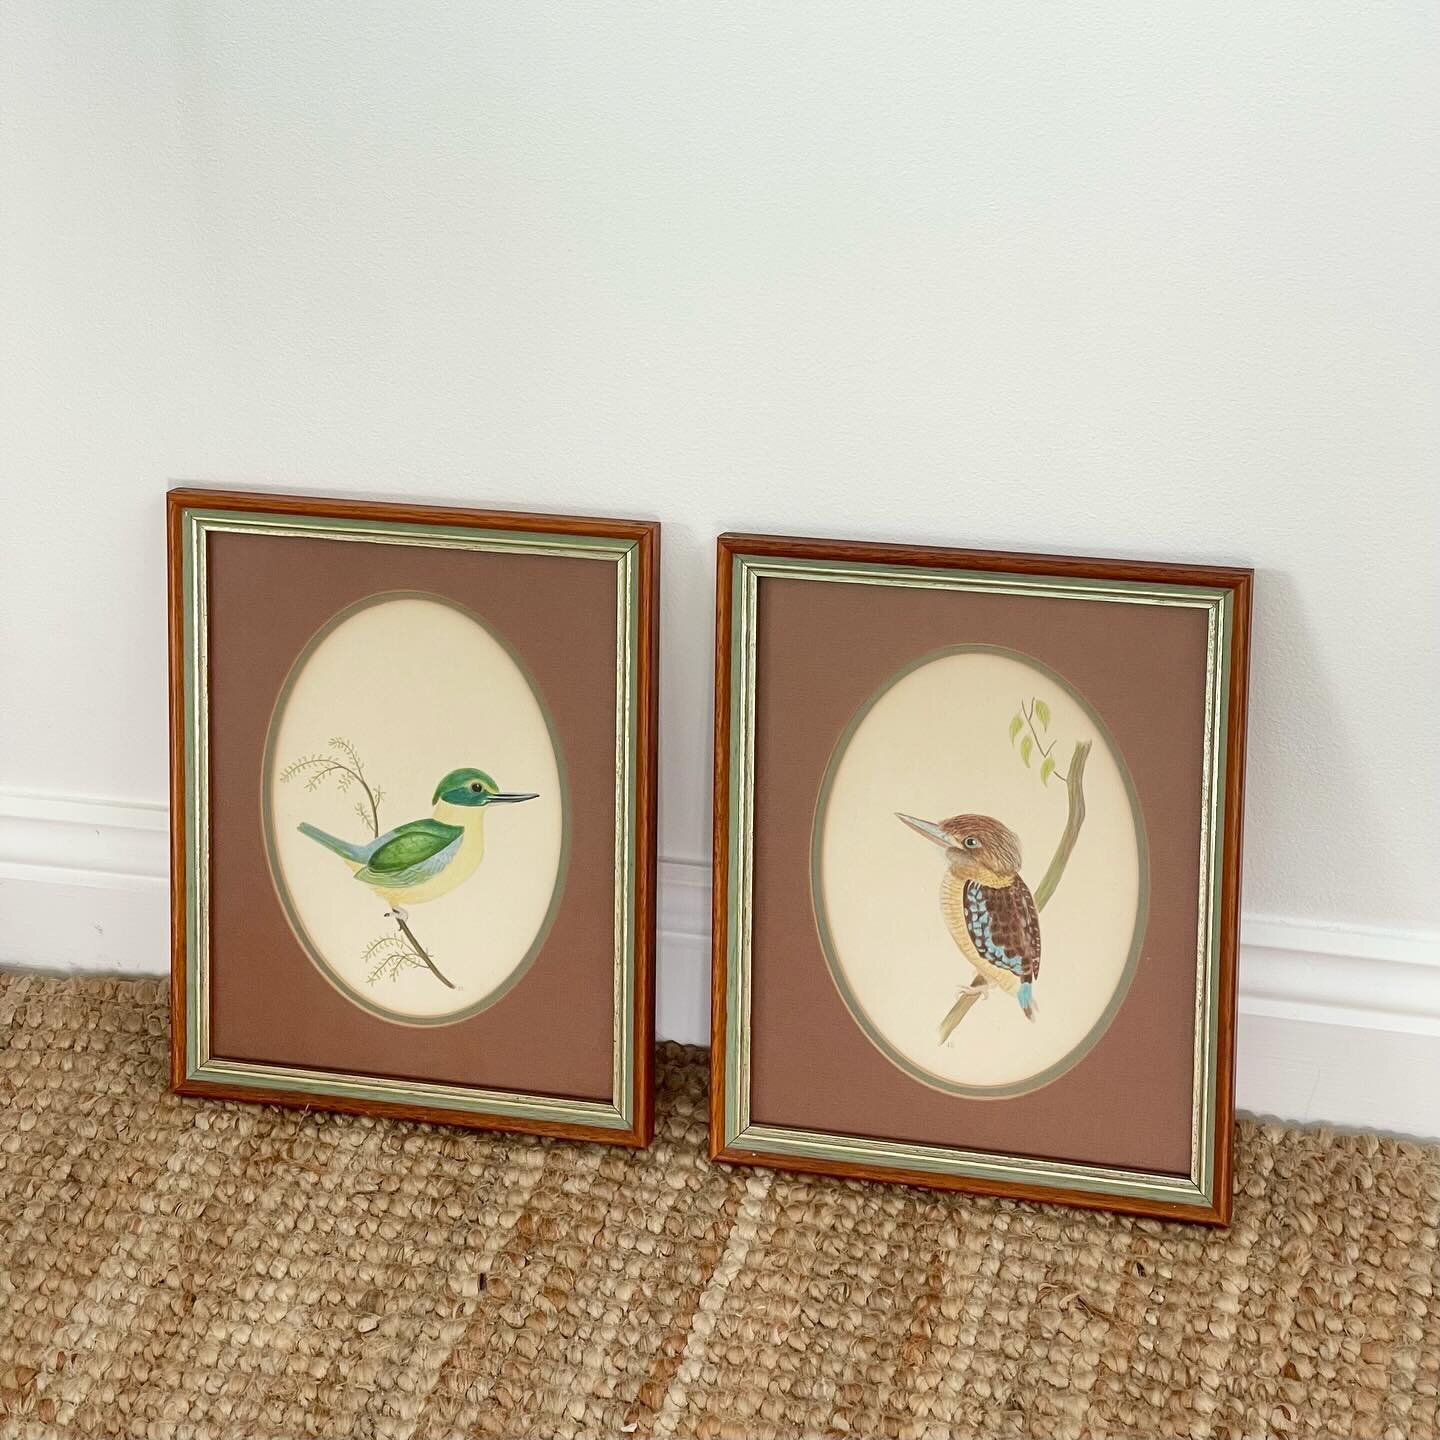 SOLD 🍋 pair of vintage framed australian bird drawings 🦜

&bull; selling as a pair 
&bull; by artist jacqueline balter in 1982
&bull; i am 90% sure these are original drawings but its very difficult to tell when they&rsquo;re framed
&bull; 21 cm wi